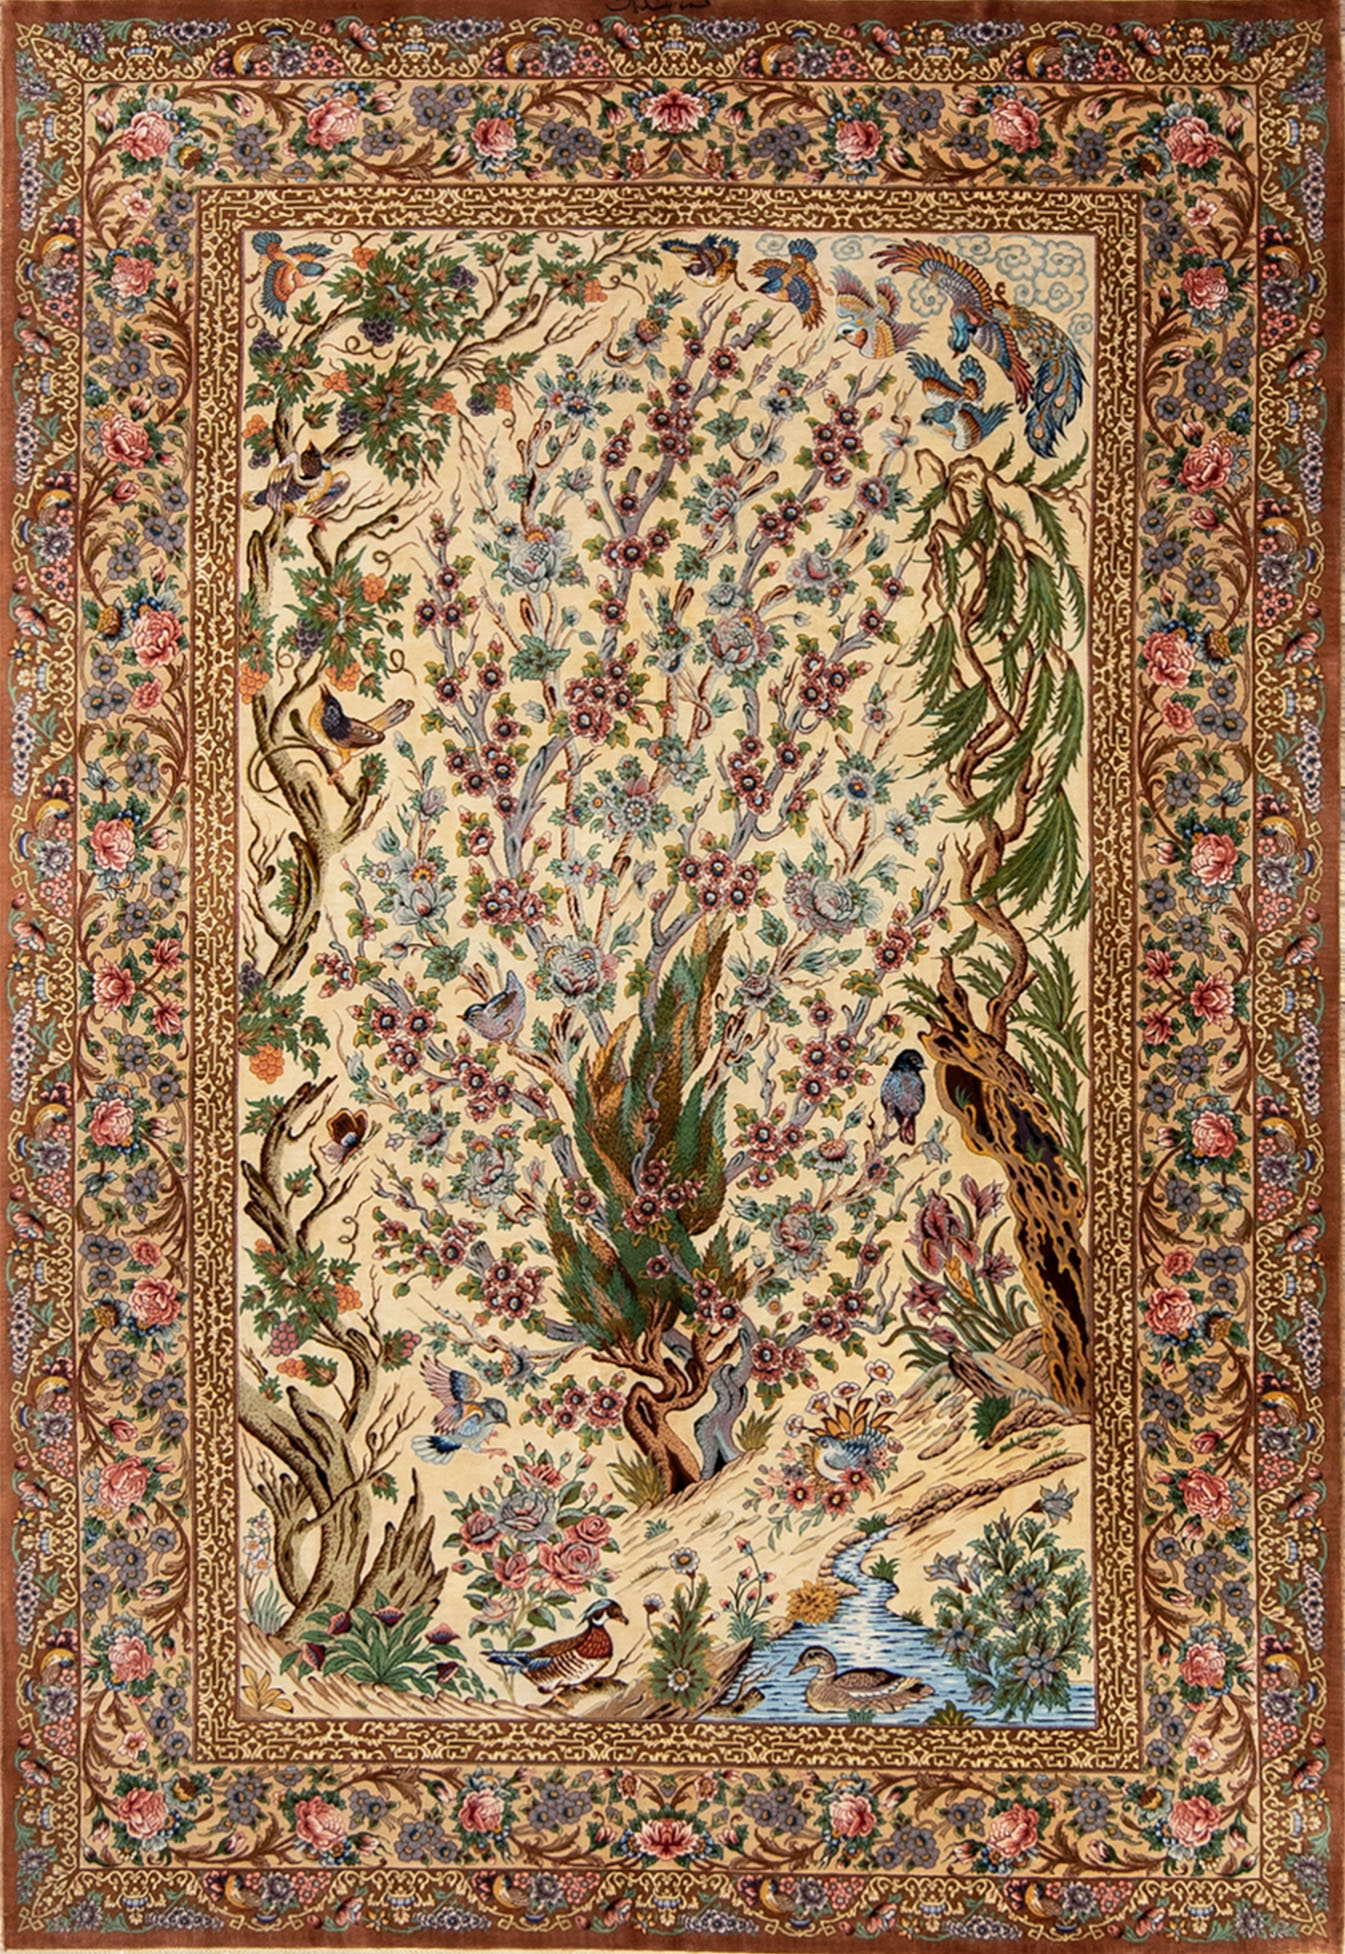 Pure silk Persian Qum rug, tree of life rug design with beige and green colors. Size 4.7x7.